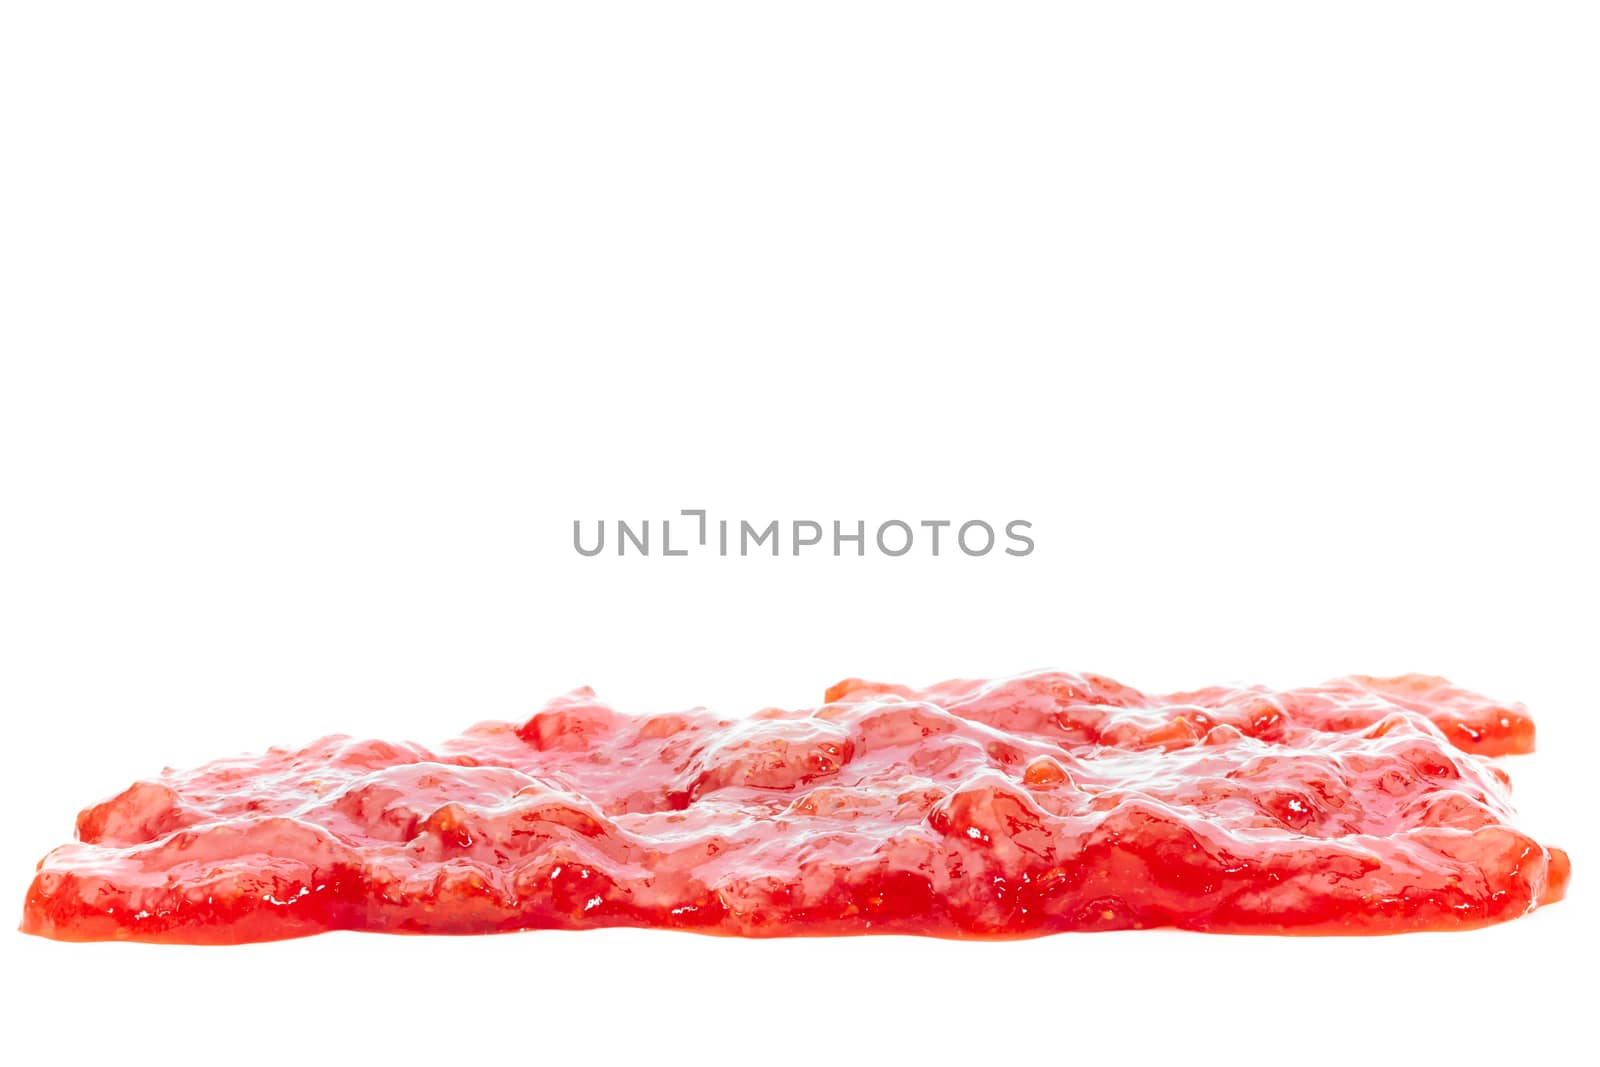 Strawberry and Jam on white background.